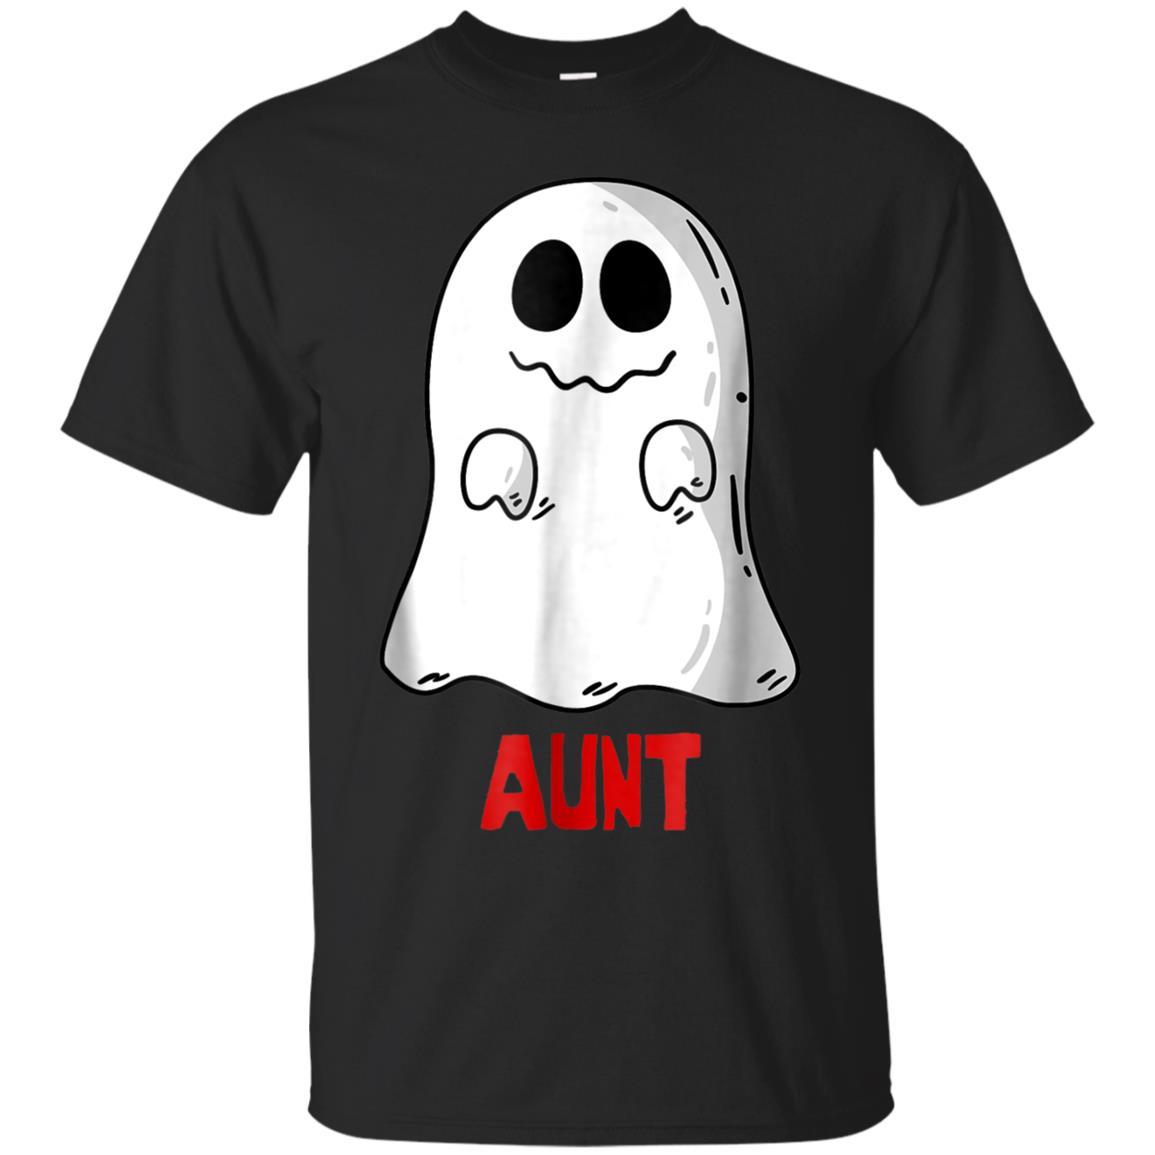 Aunt Ghost Family Matching Halloween Catsolo Fashion T Shirt